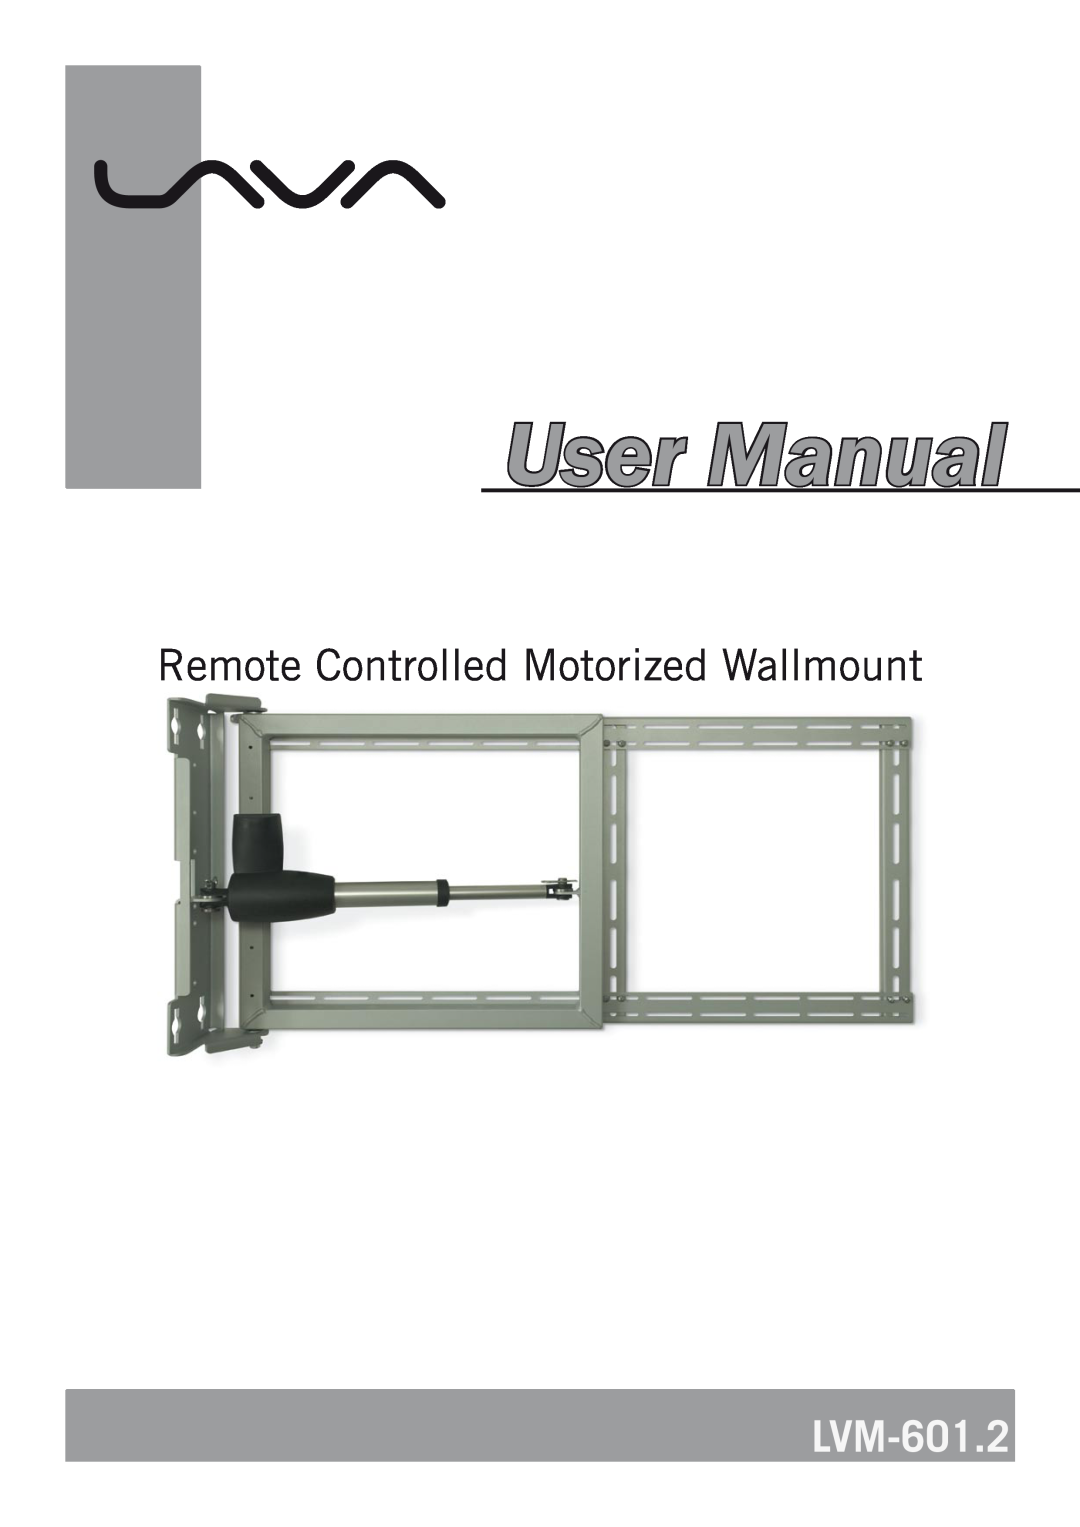 CLO Systems LVM-601-2 manual User Manual, Remote Controlled Motorized Wallmount, LVM-601.2 